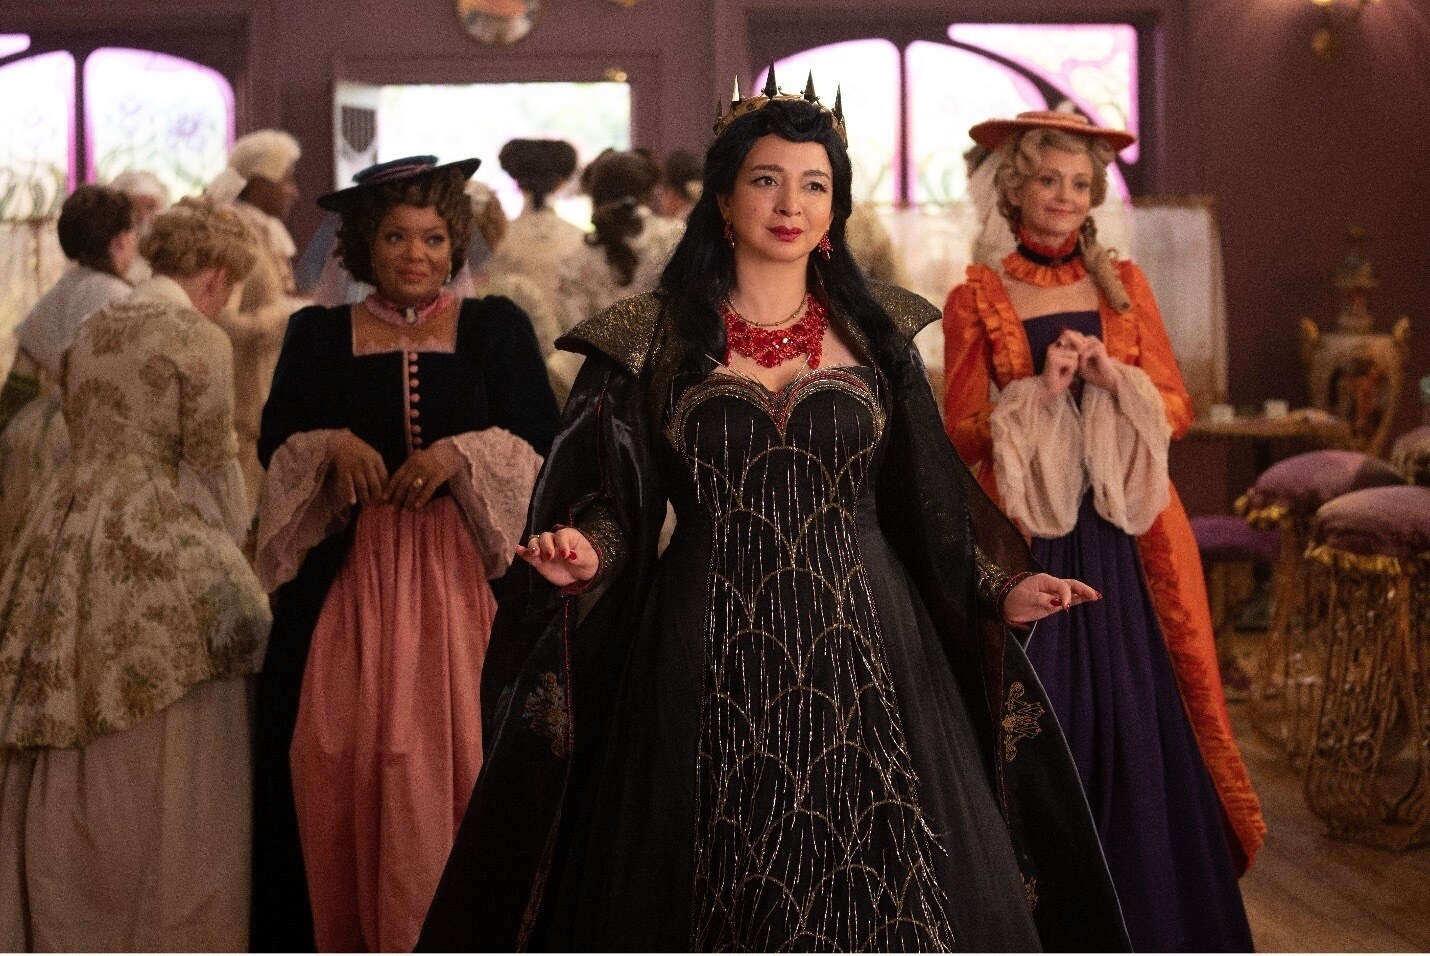 The "Queen" of Monroeville enters with her friends in the Disney+ Original Disenchanted